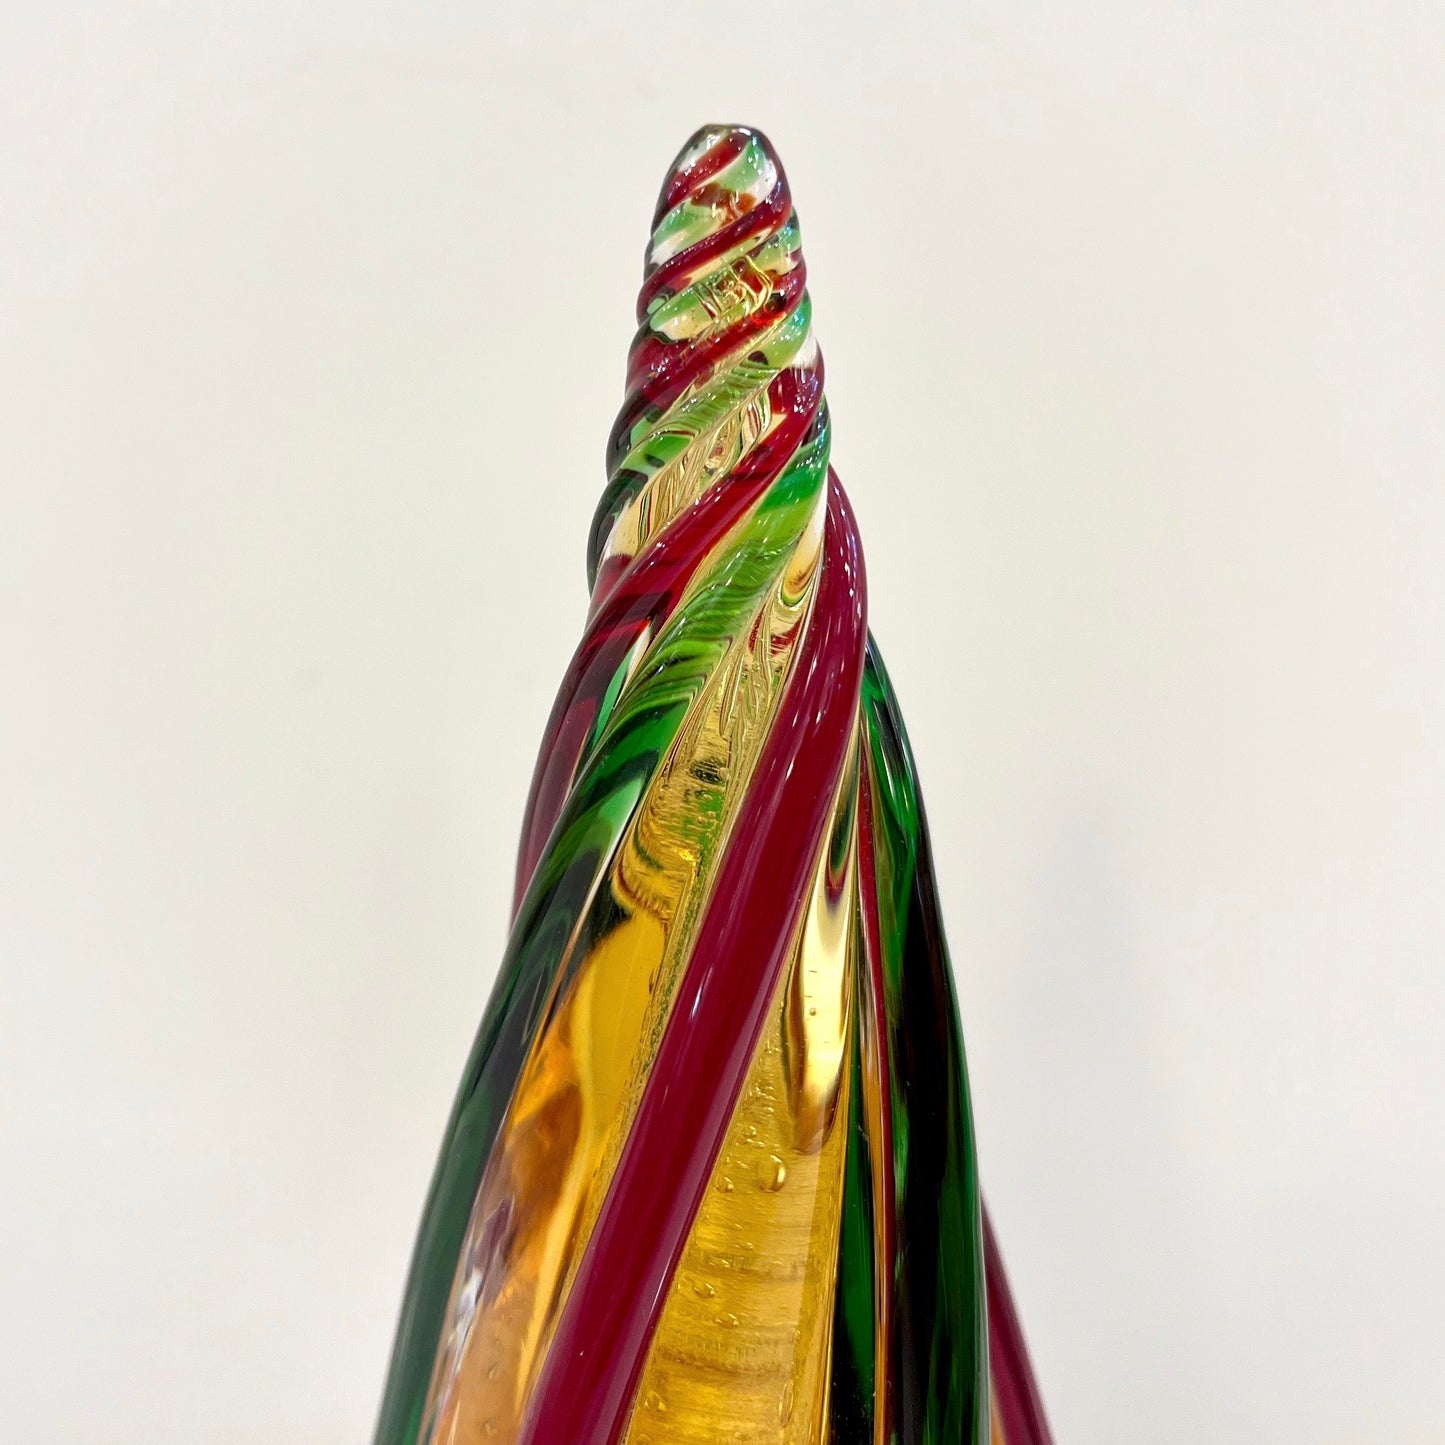 Formia Italian Vintage Red Green Amber Murano Glass Christmas Tree Sculpture